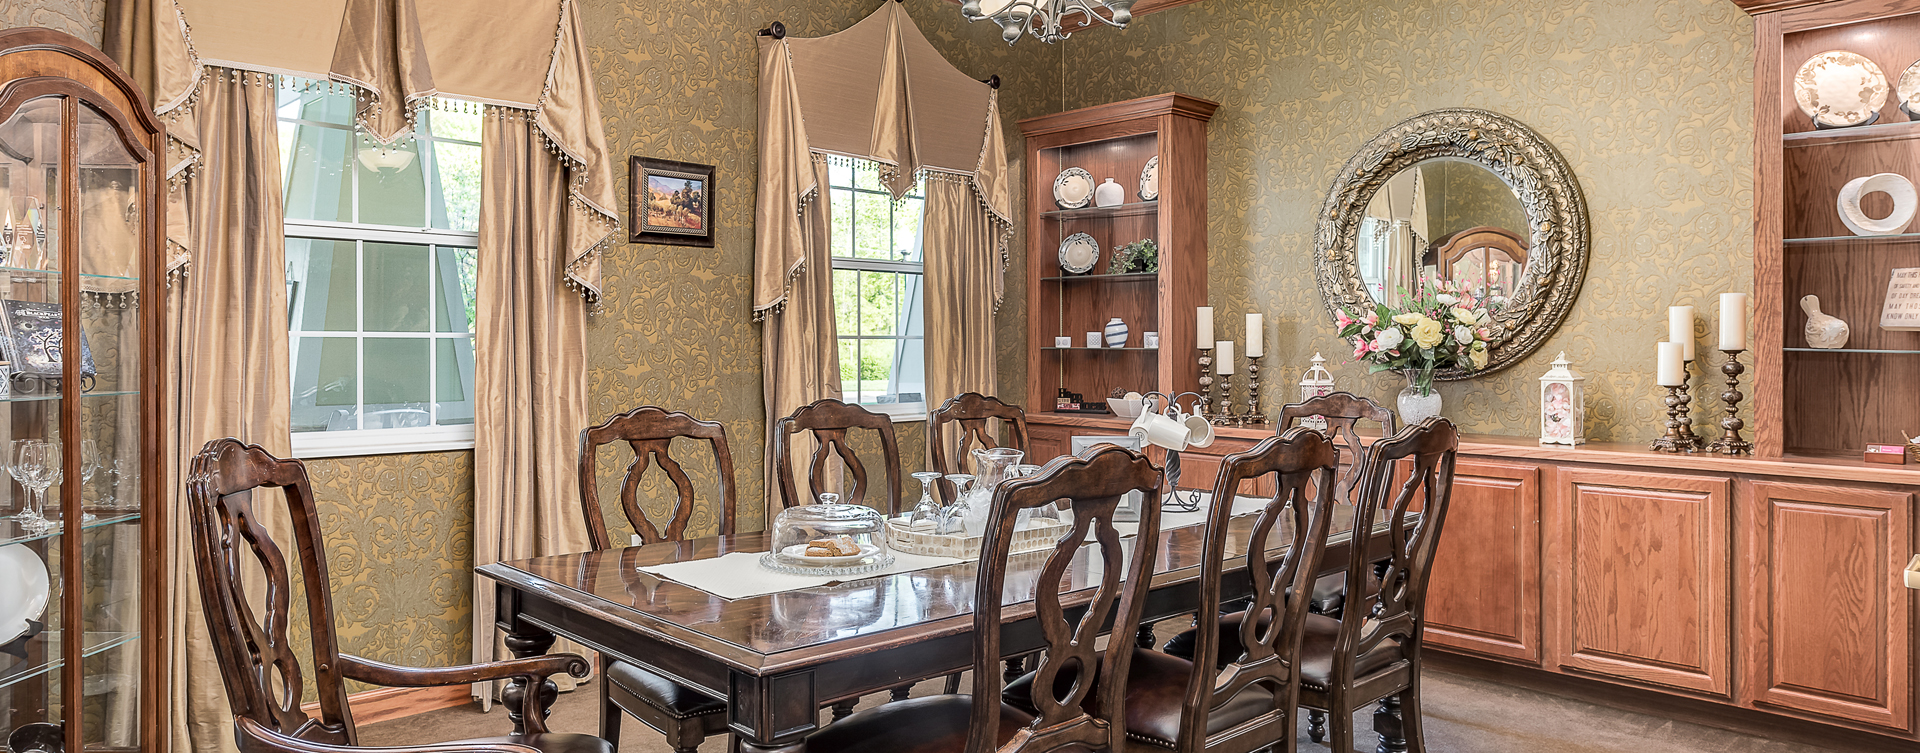 Food is best when shared with family and friends in the private dining room at Bickford of Midland